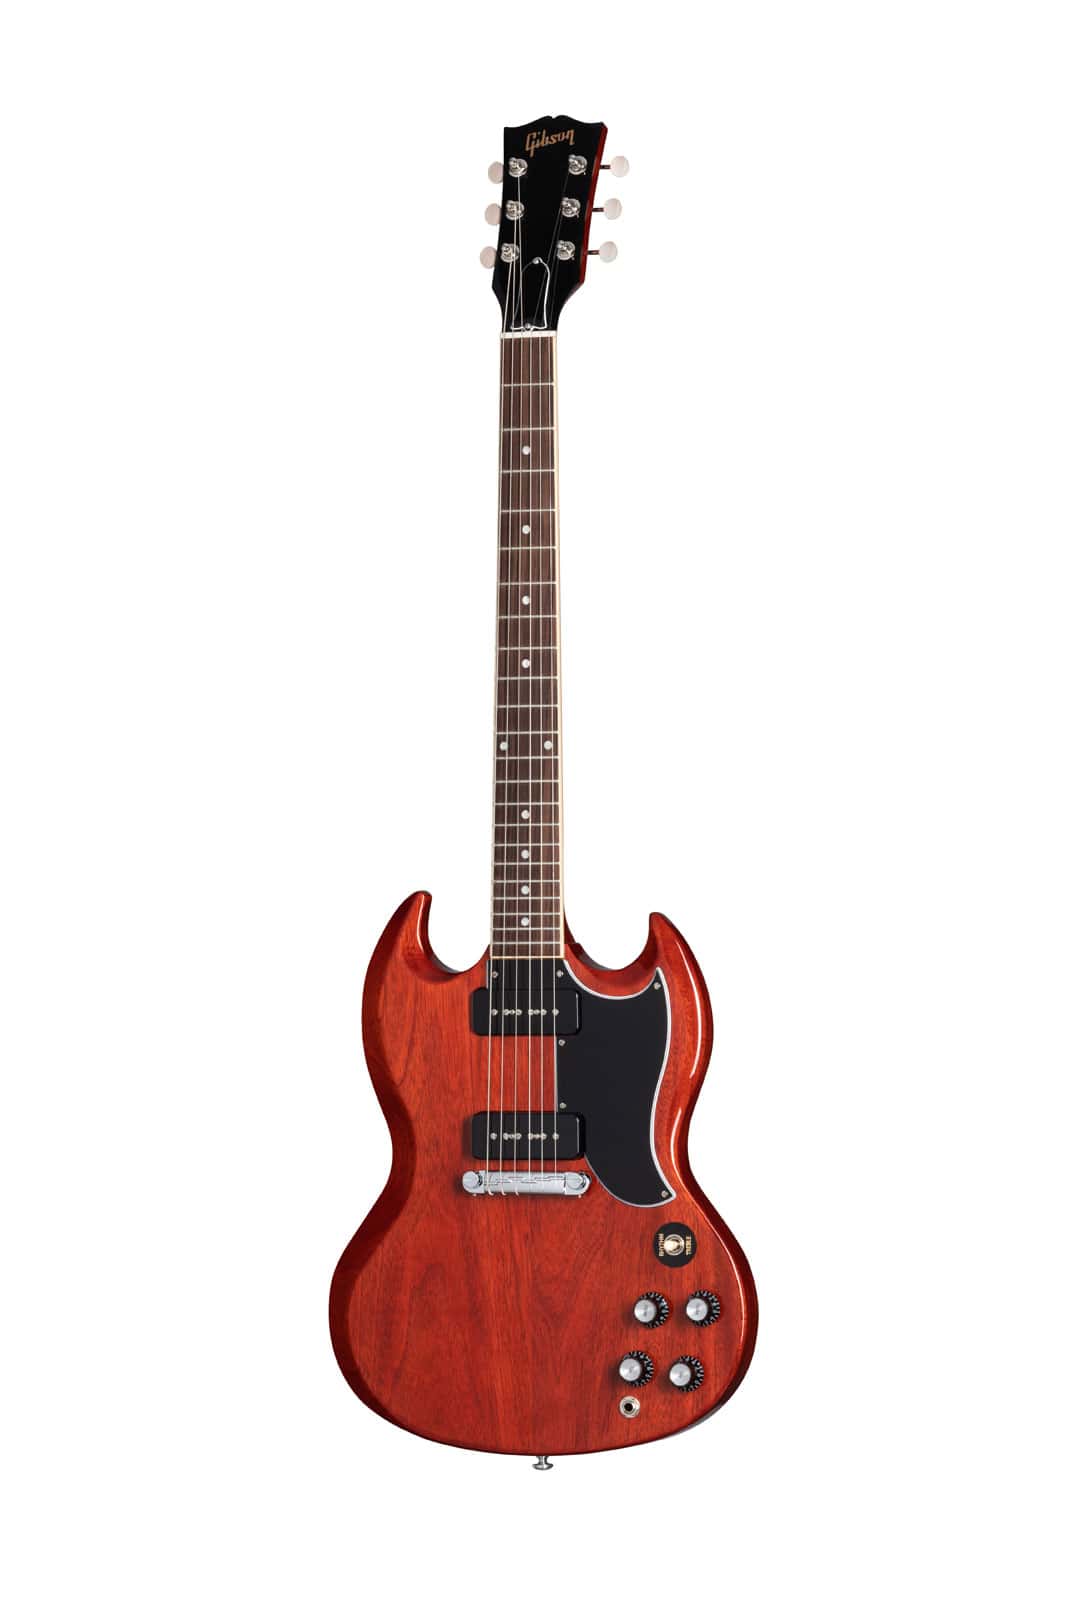 GIBSON USA SG SPECIAL VINTAGE CHERRY OC - REFURBISHED